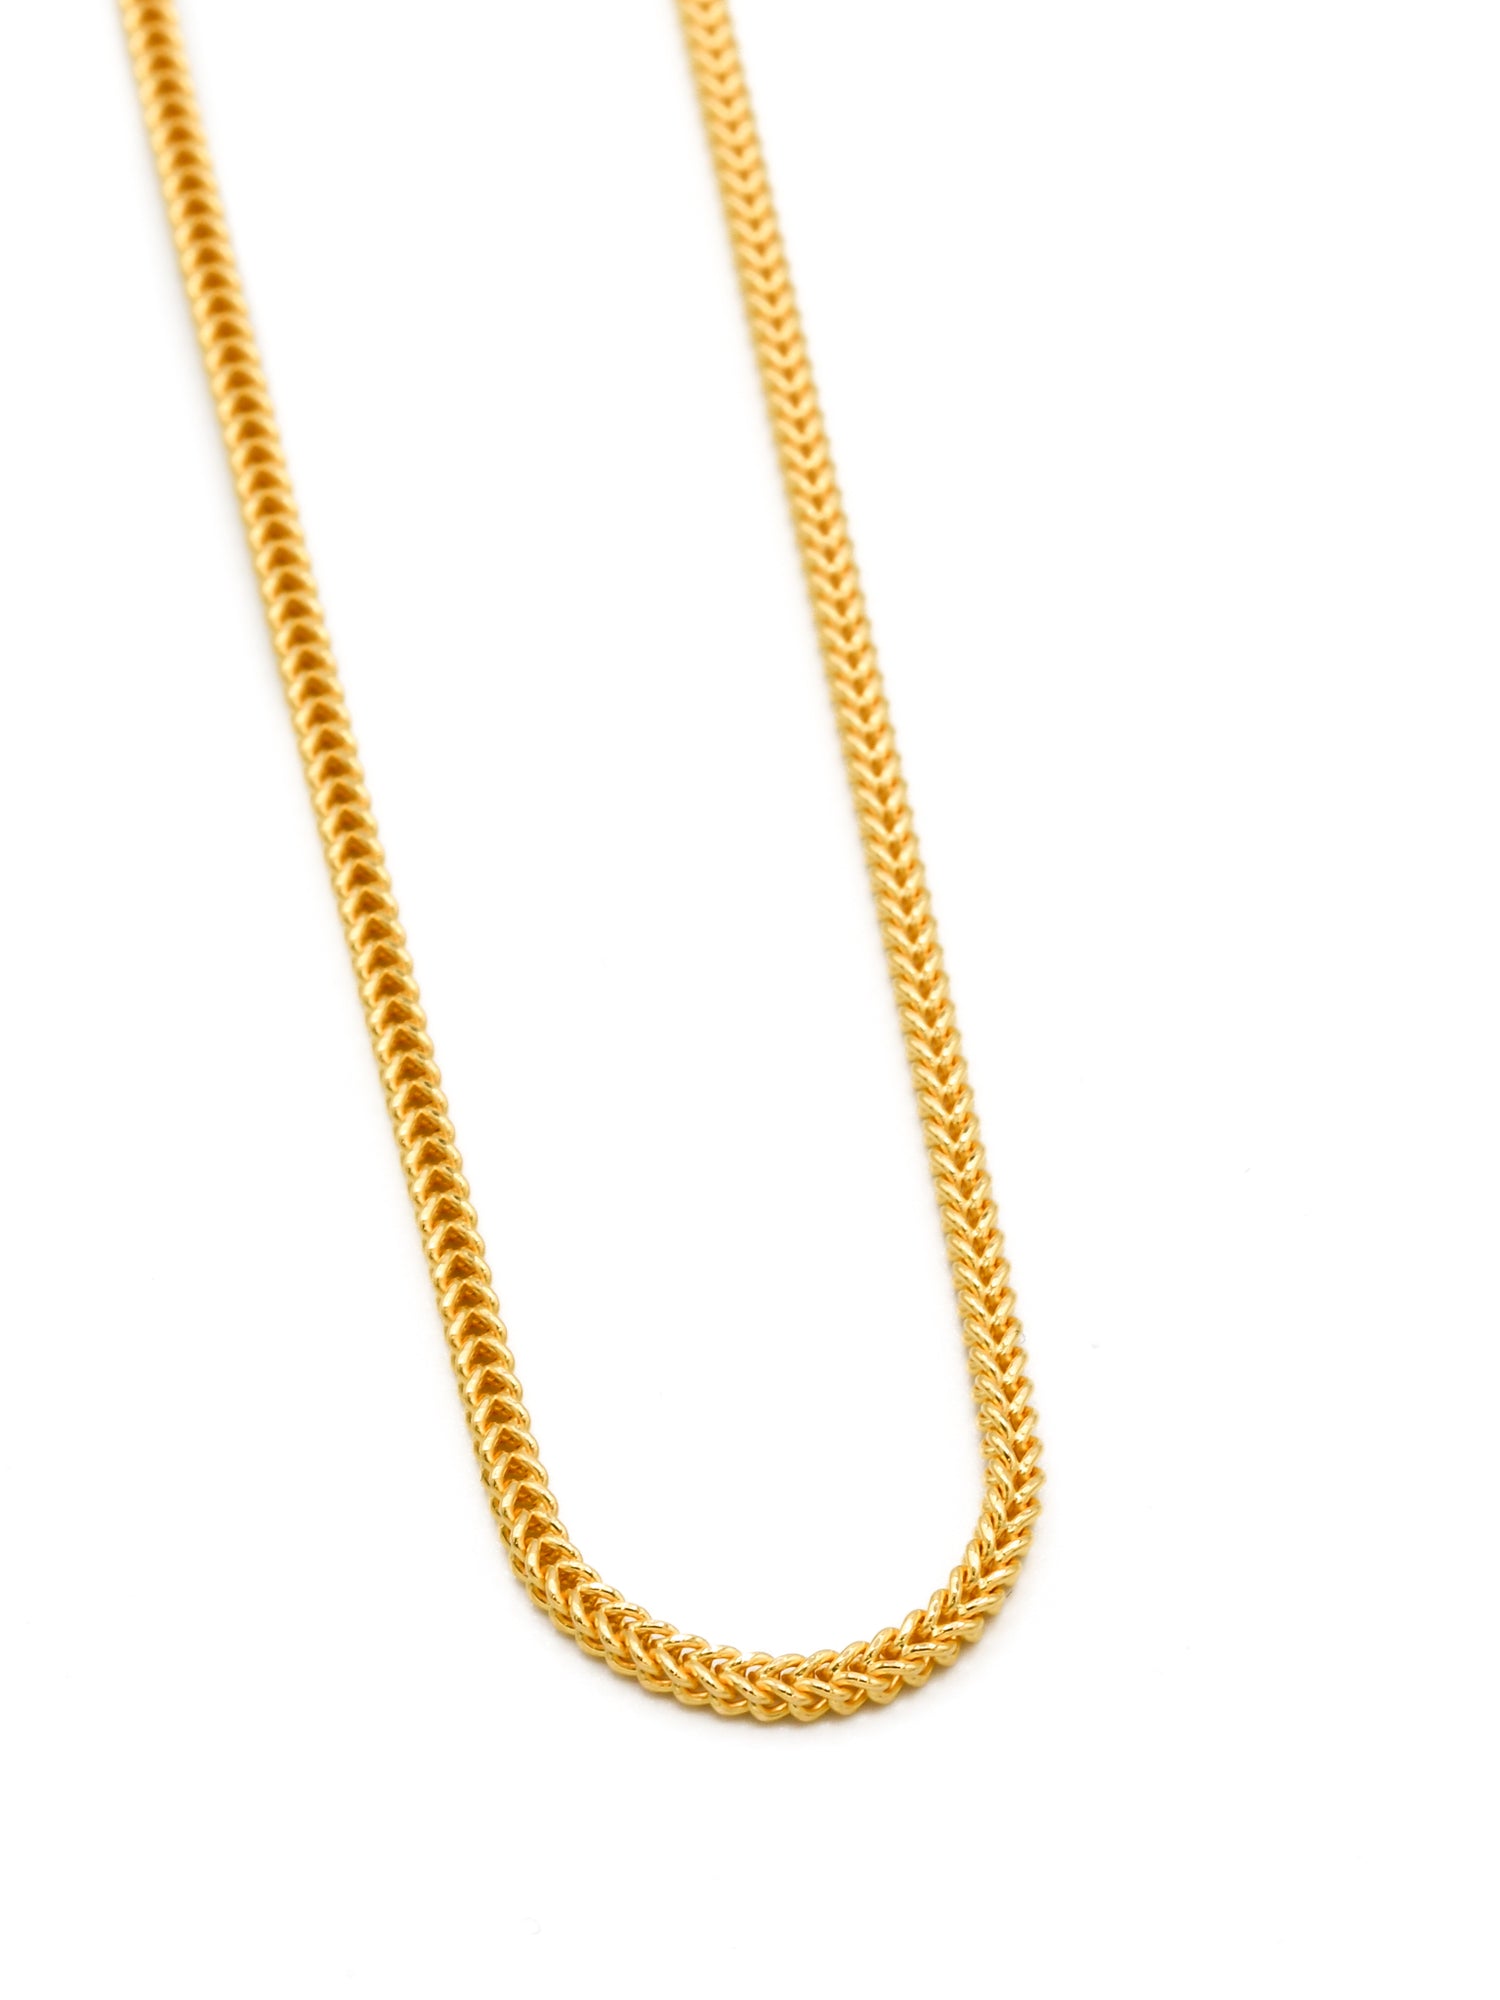 22ct Gold Hollow Fox Tail Chain - 45 CM - Roop Darshan